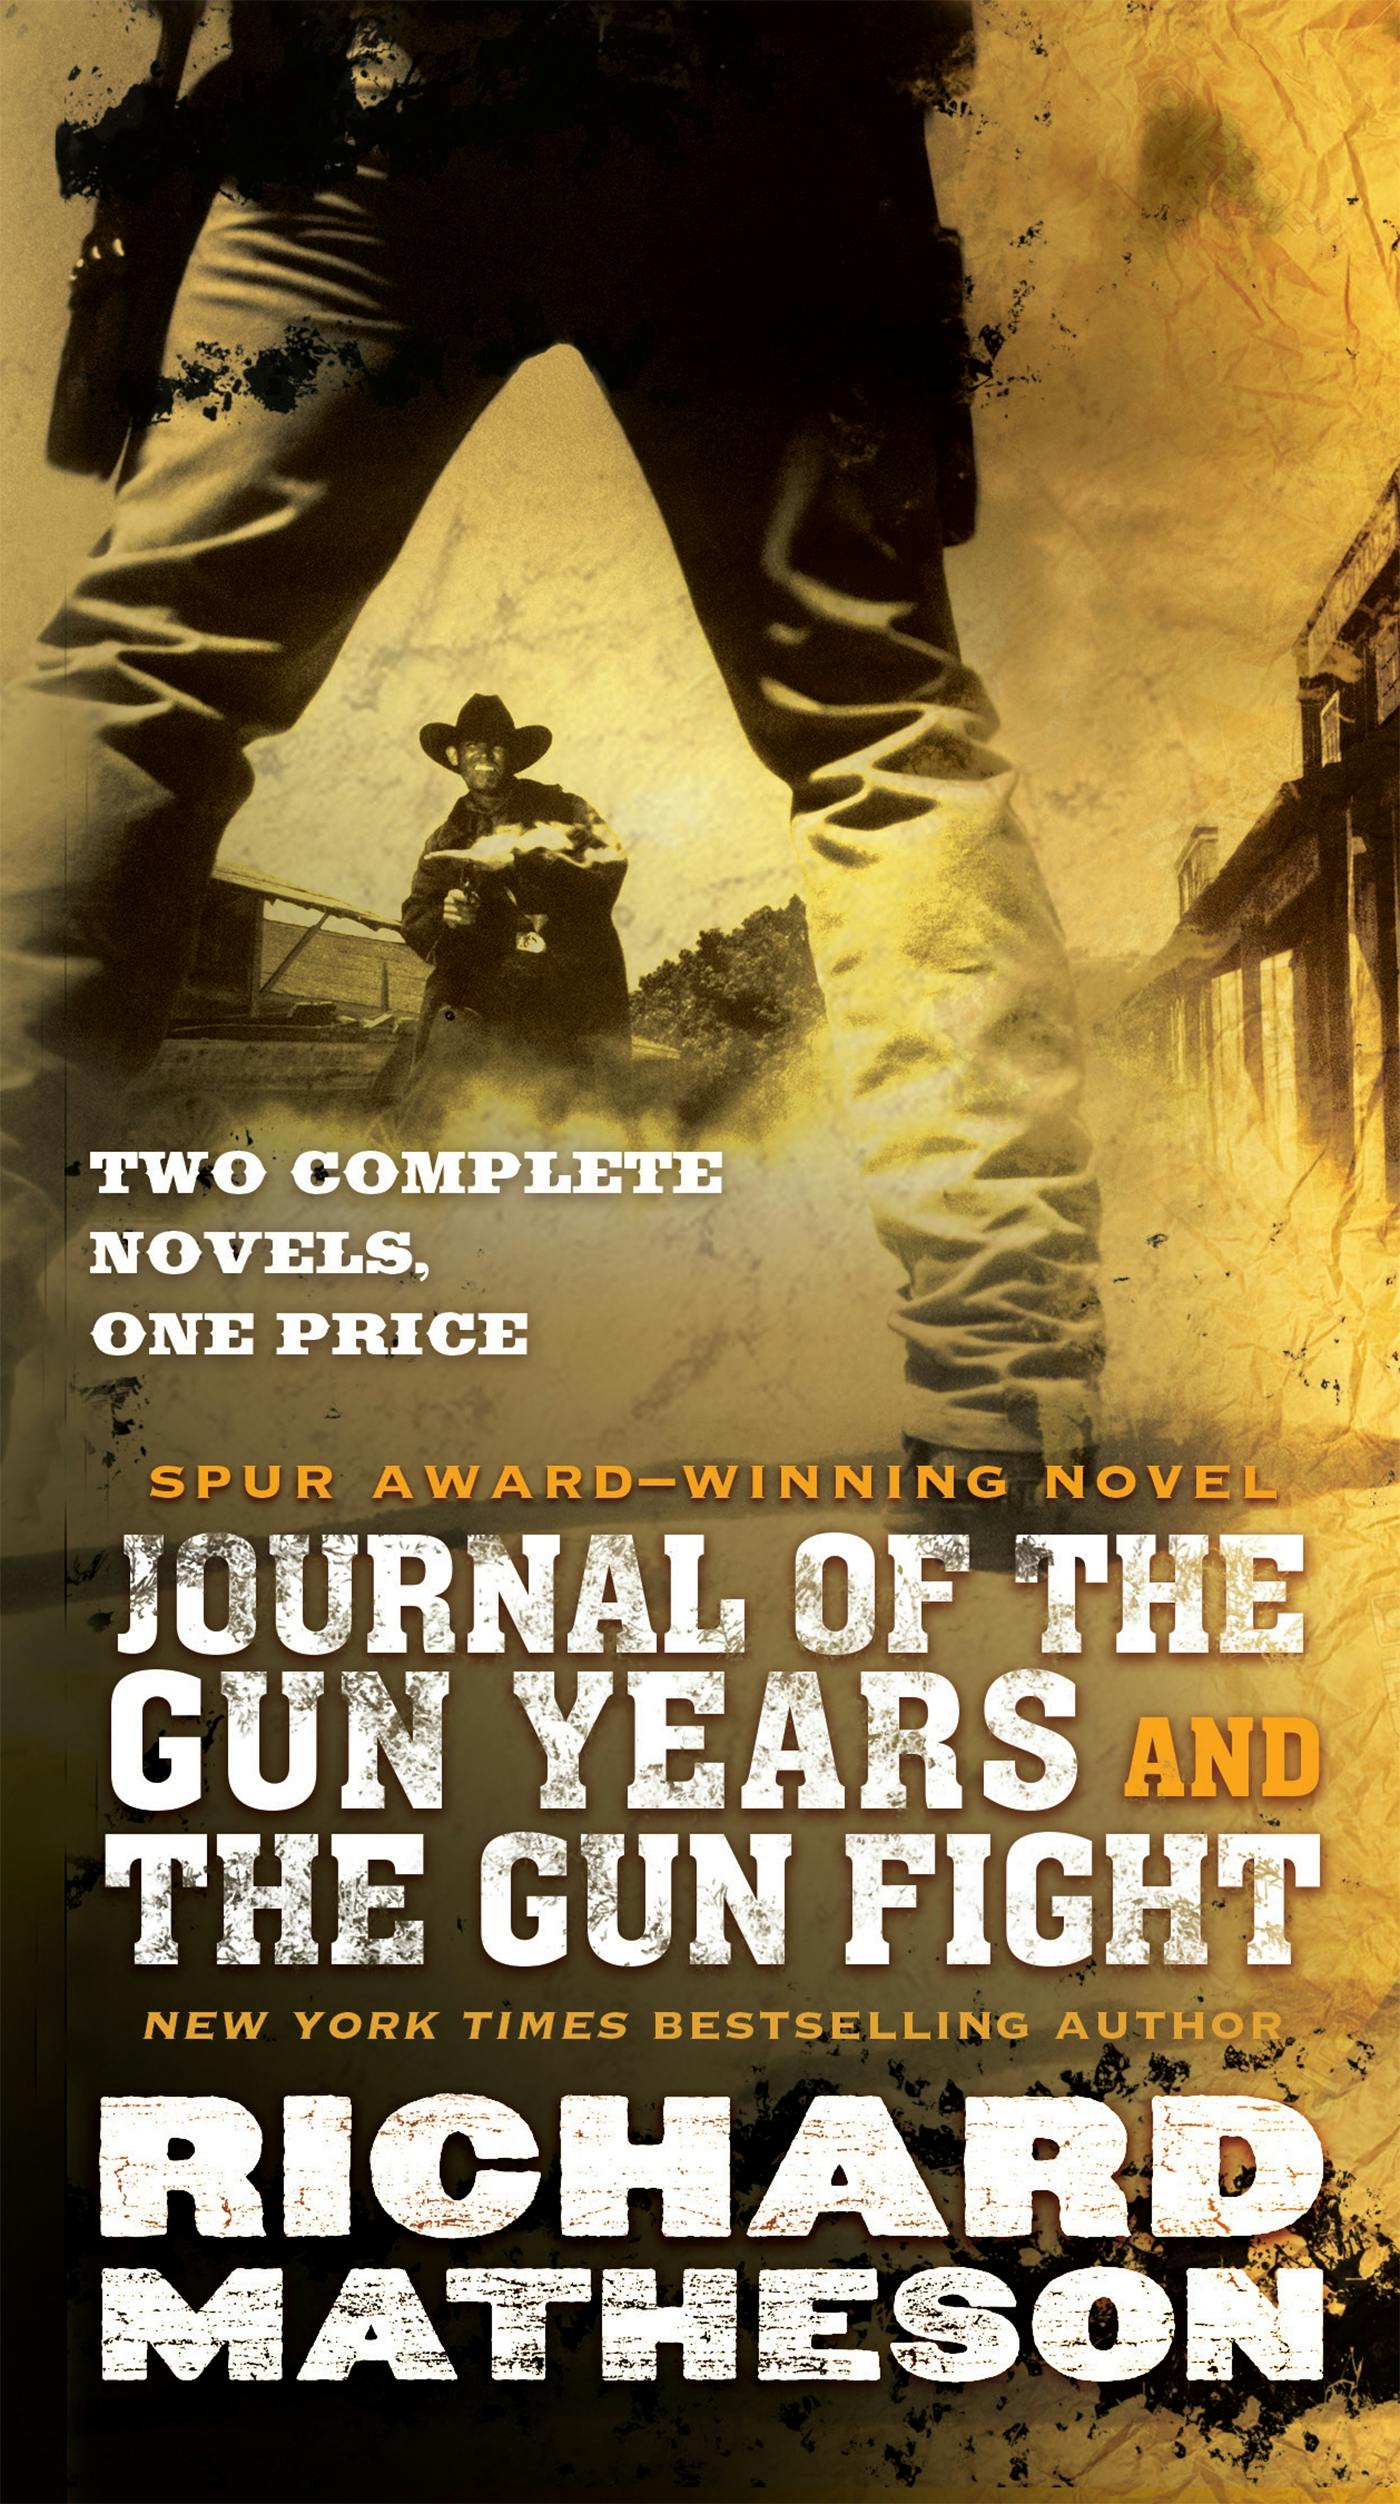 Cover for the book titled as: Journal of the Gun Years and The Gun Fight